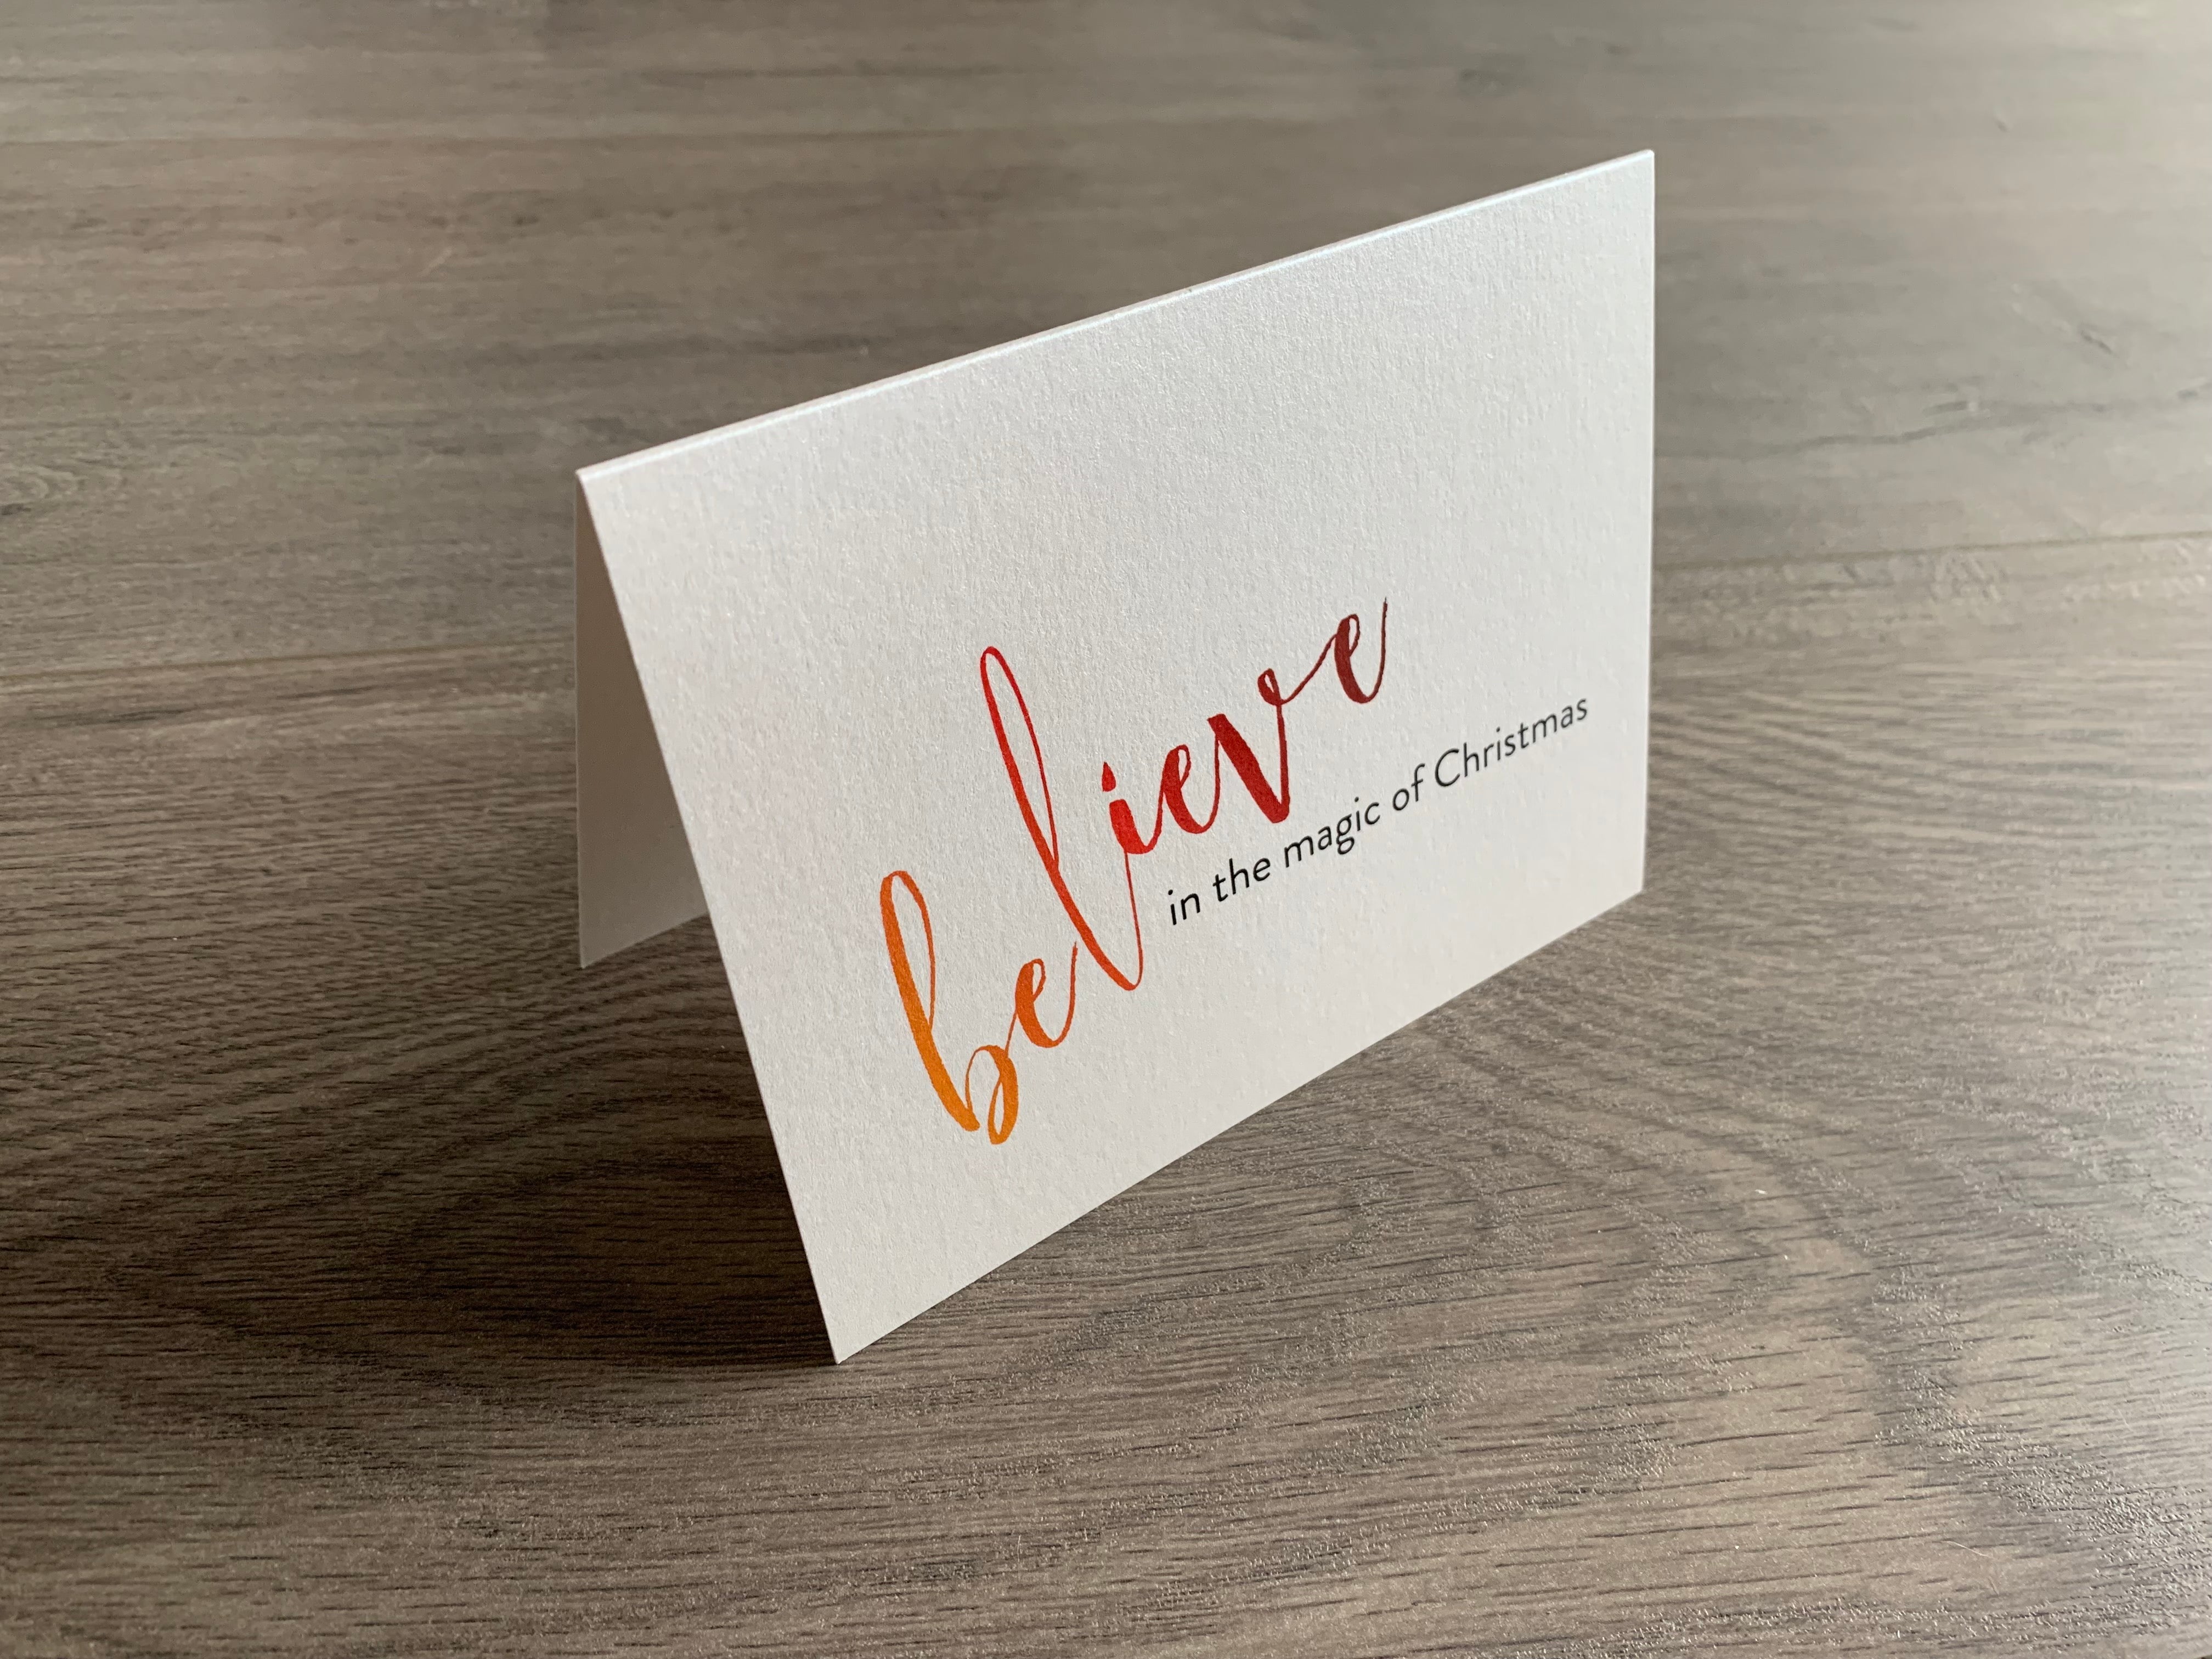 A folded notecard is propped up on a gray wood floor. The notecard is of a cream-colored pearlized paper. The card says, "Believe in the magic of Christmas." Meaning of Christmas collection by Stationare.